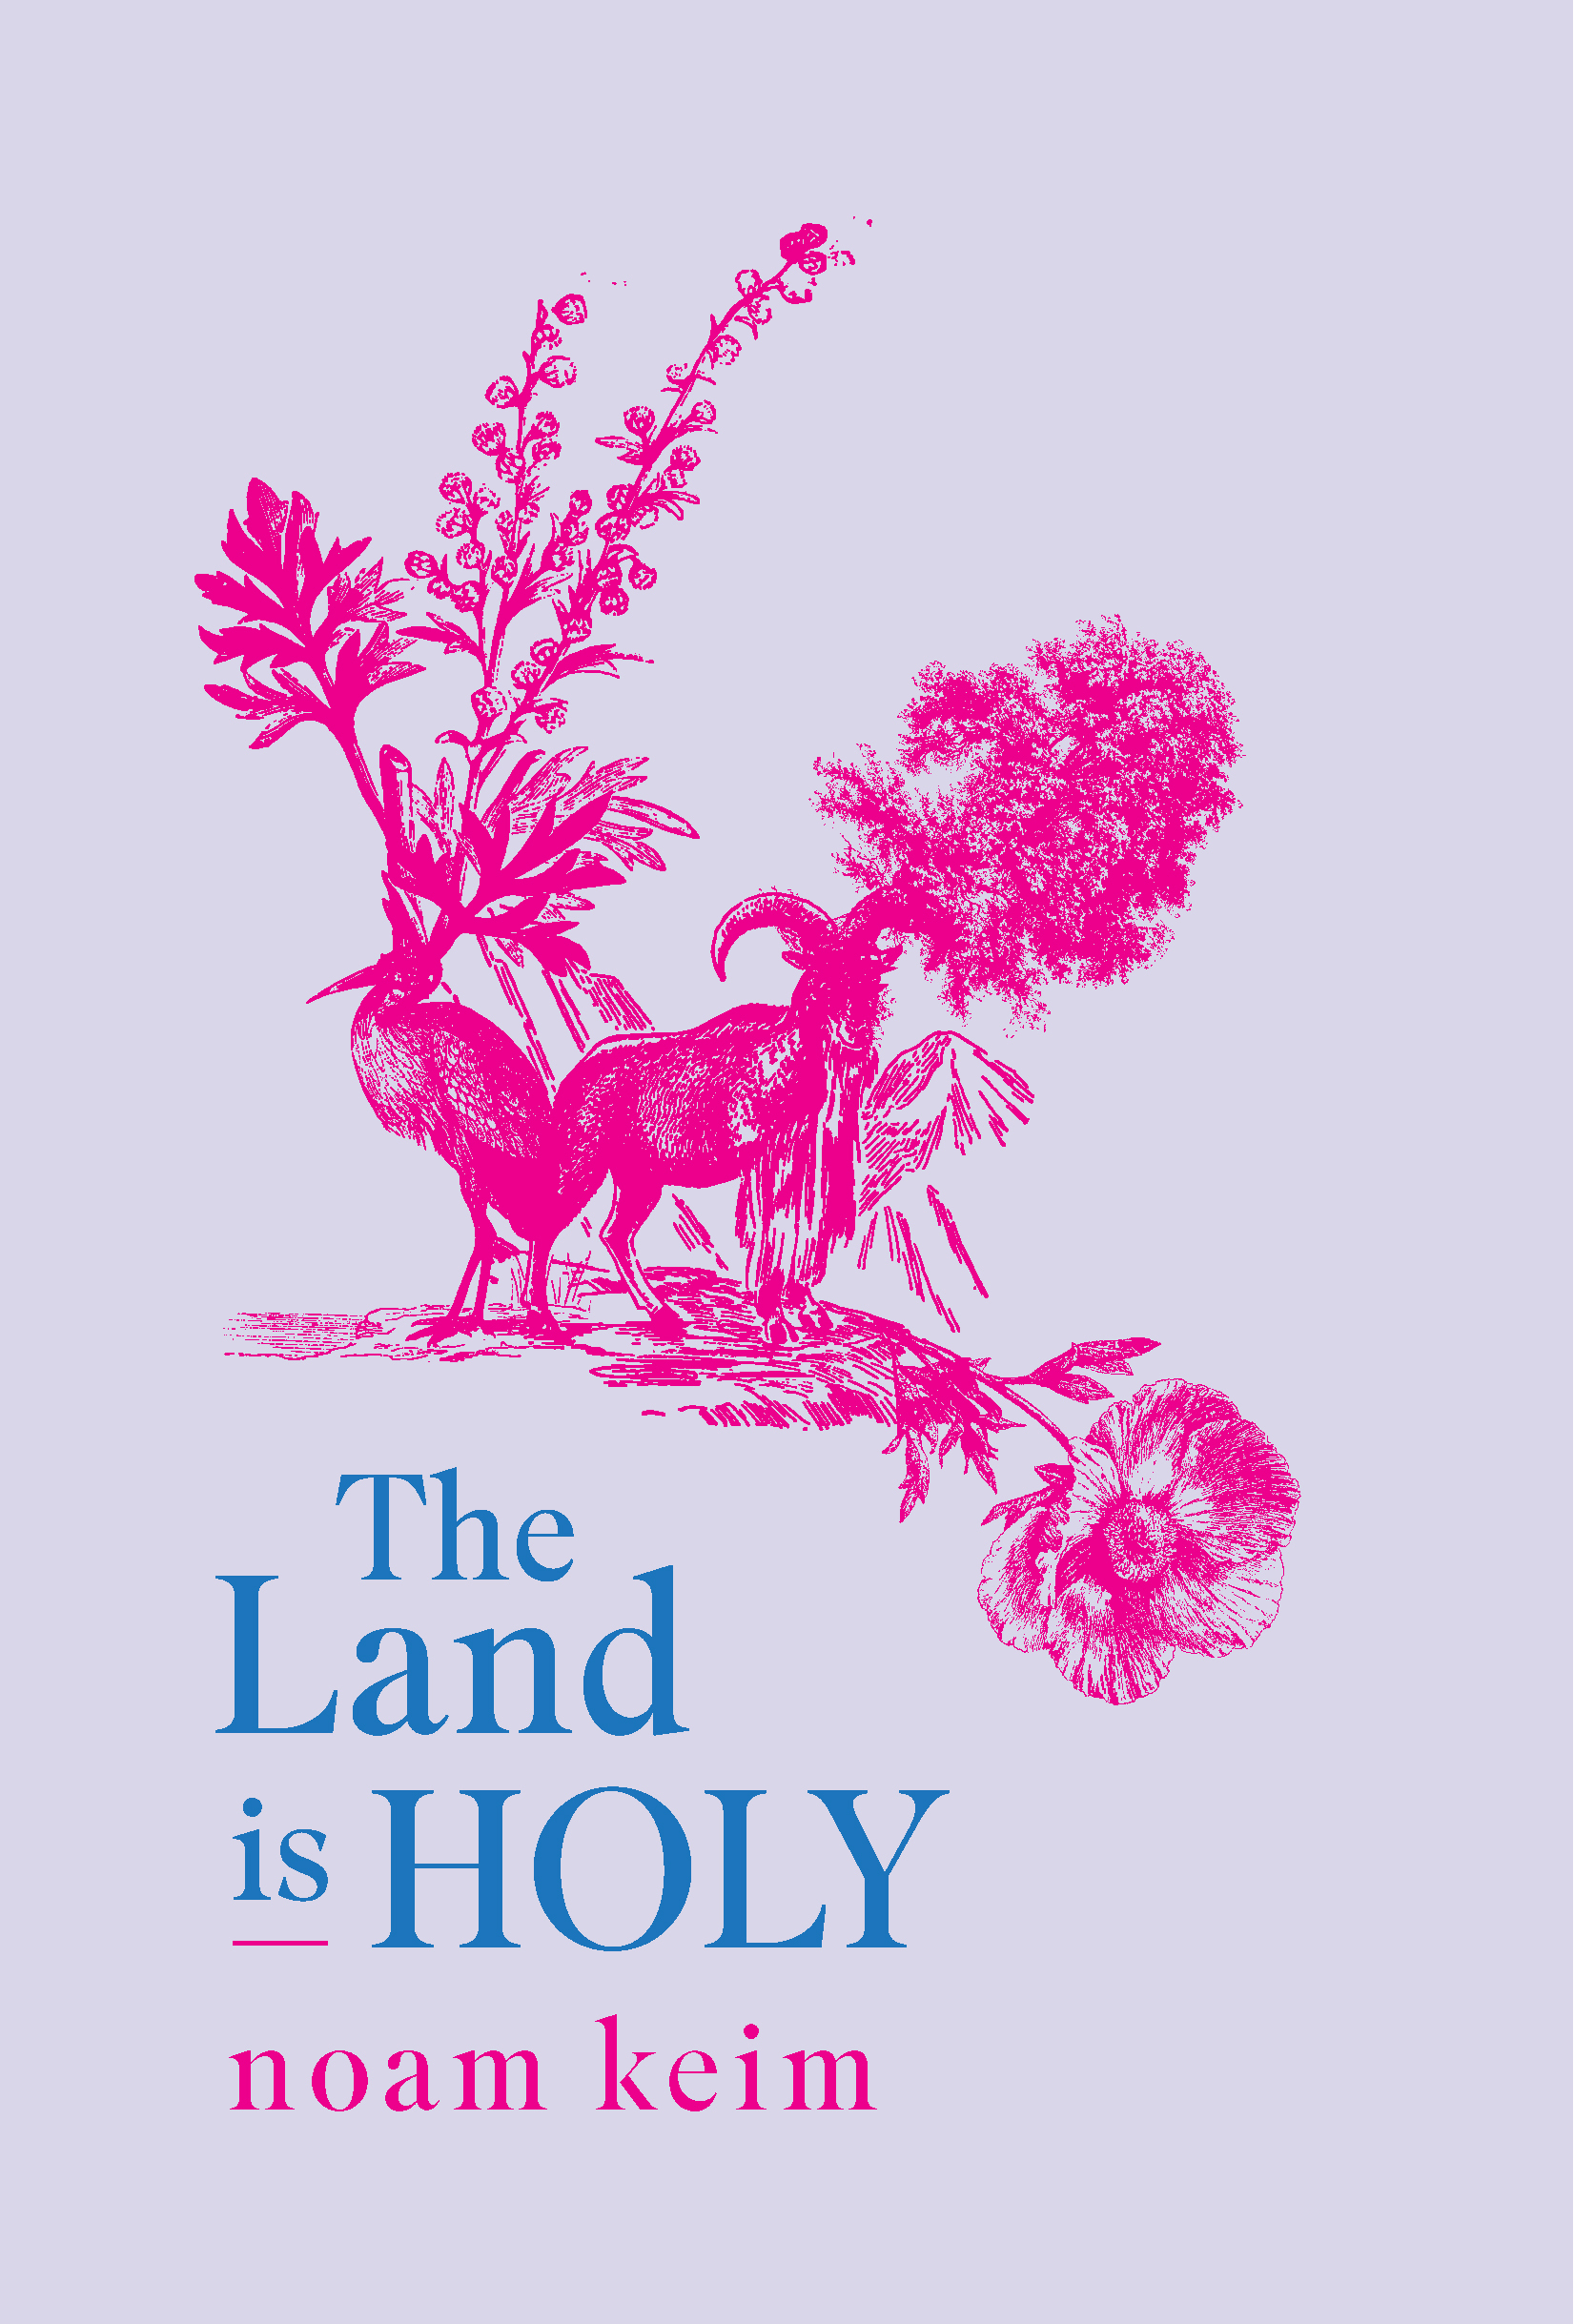 The Land is Holy by noam keim